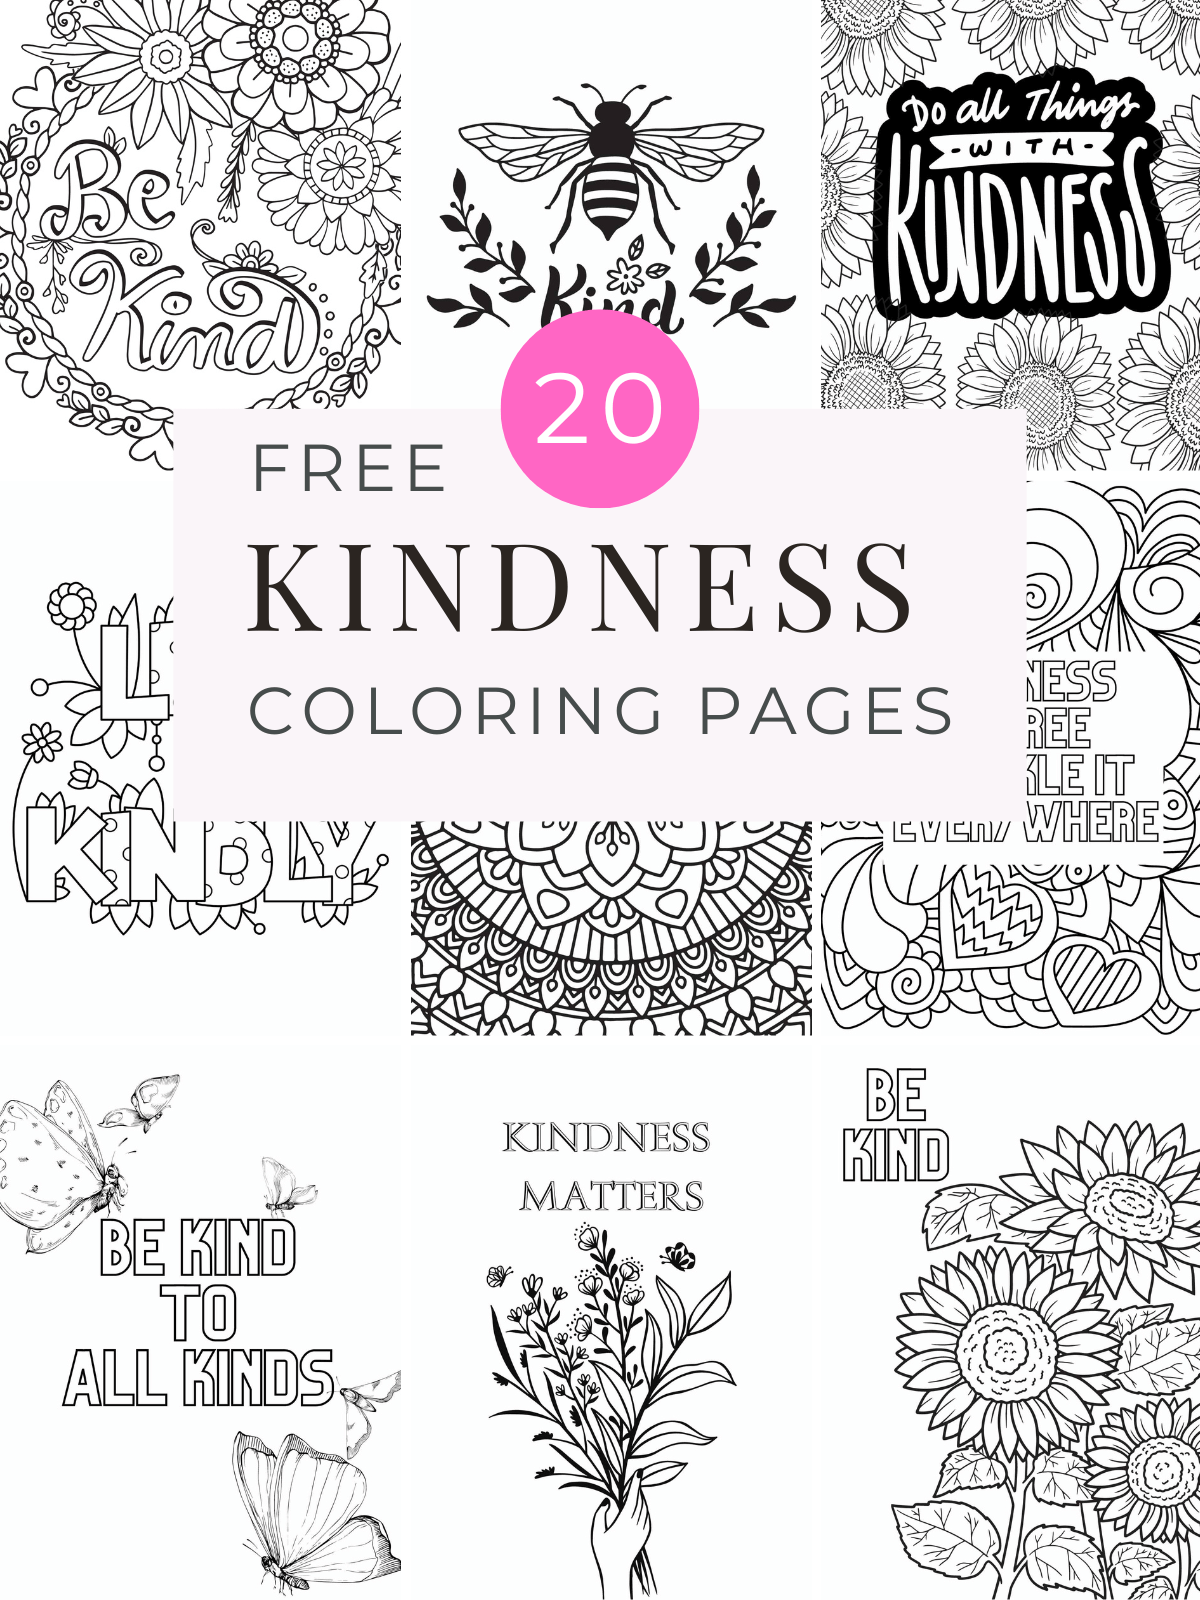 A collage of black and white coloring pages. Text overlay reads "20 Free kindness coloring pages"